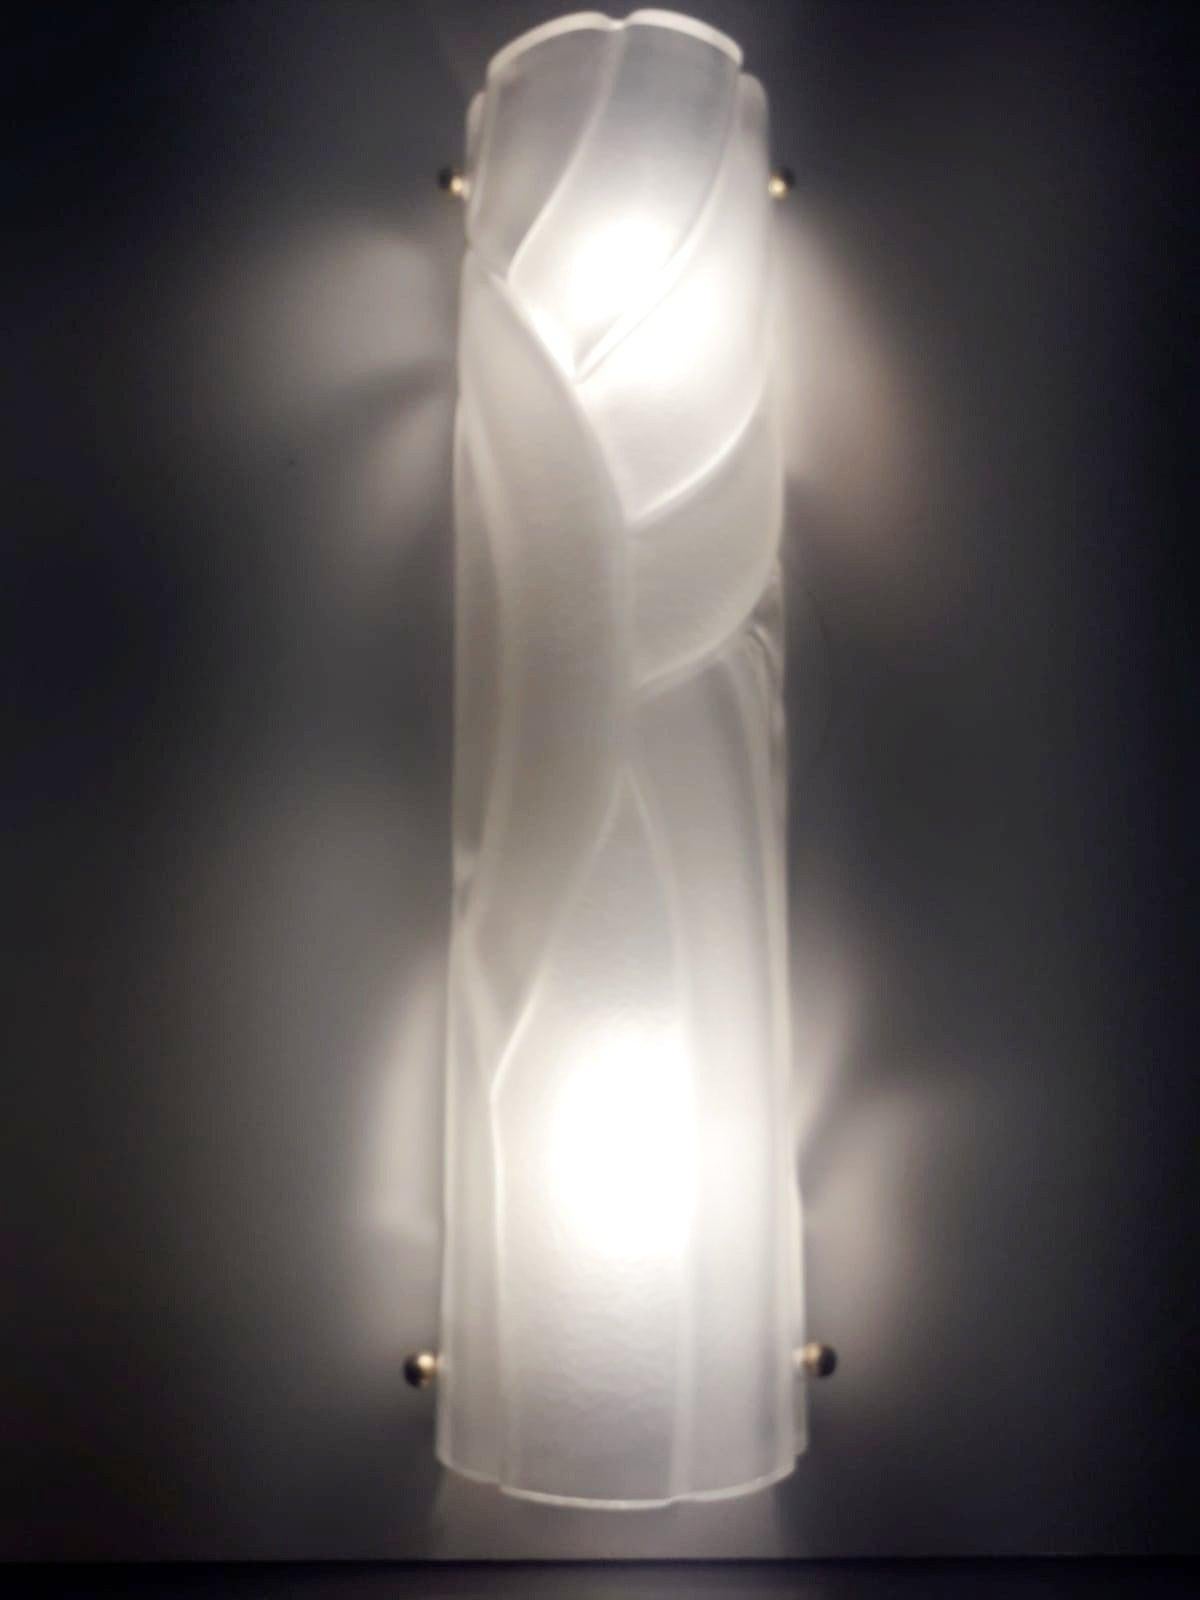 Italian Art Deco style wall light or flush mount shown in frosted Murano glass hand blown to create a stylish wrapped design pattern, mounted on white metal frame / designed by Fabio Bergomi for Fabio Ltd, made in Italy
2-light / E12 or E14 type /